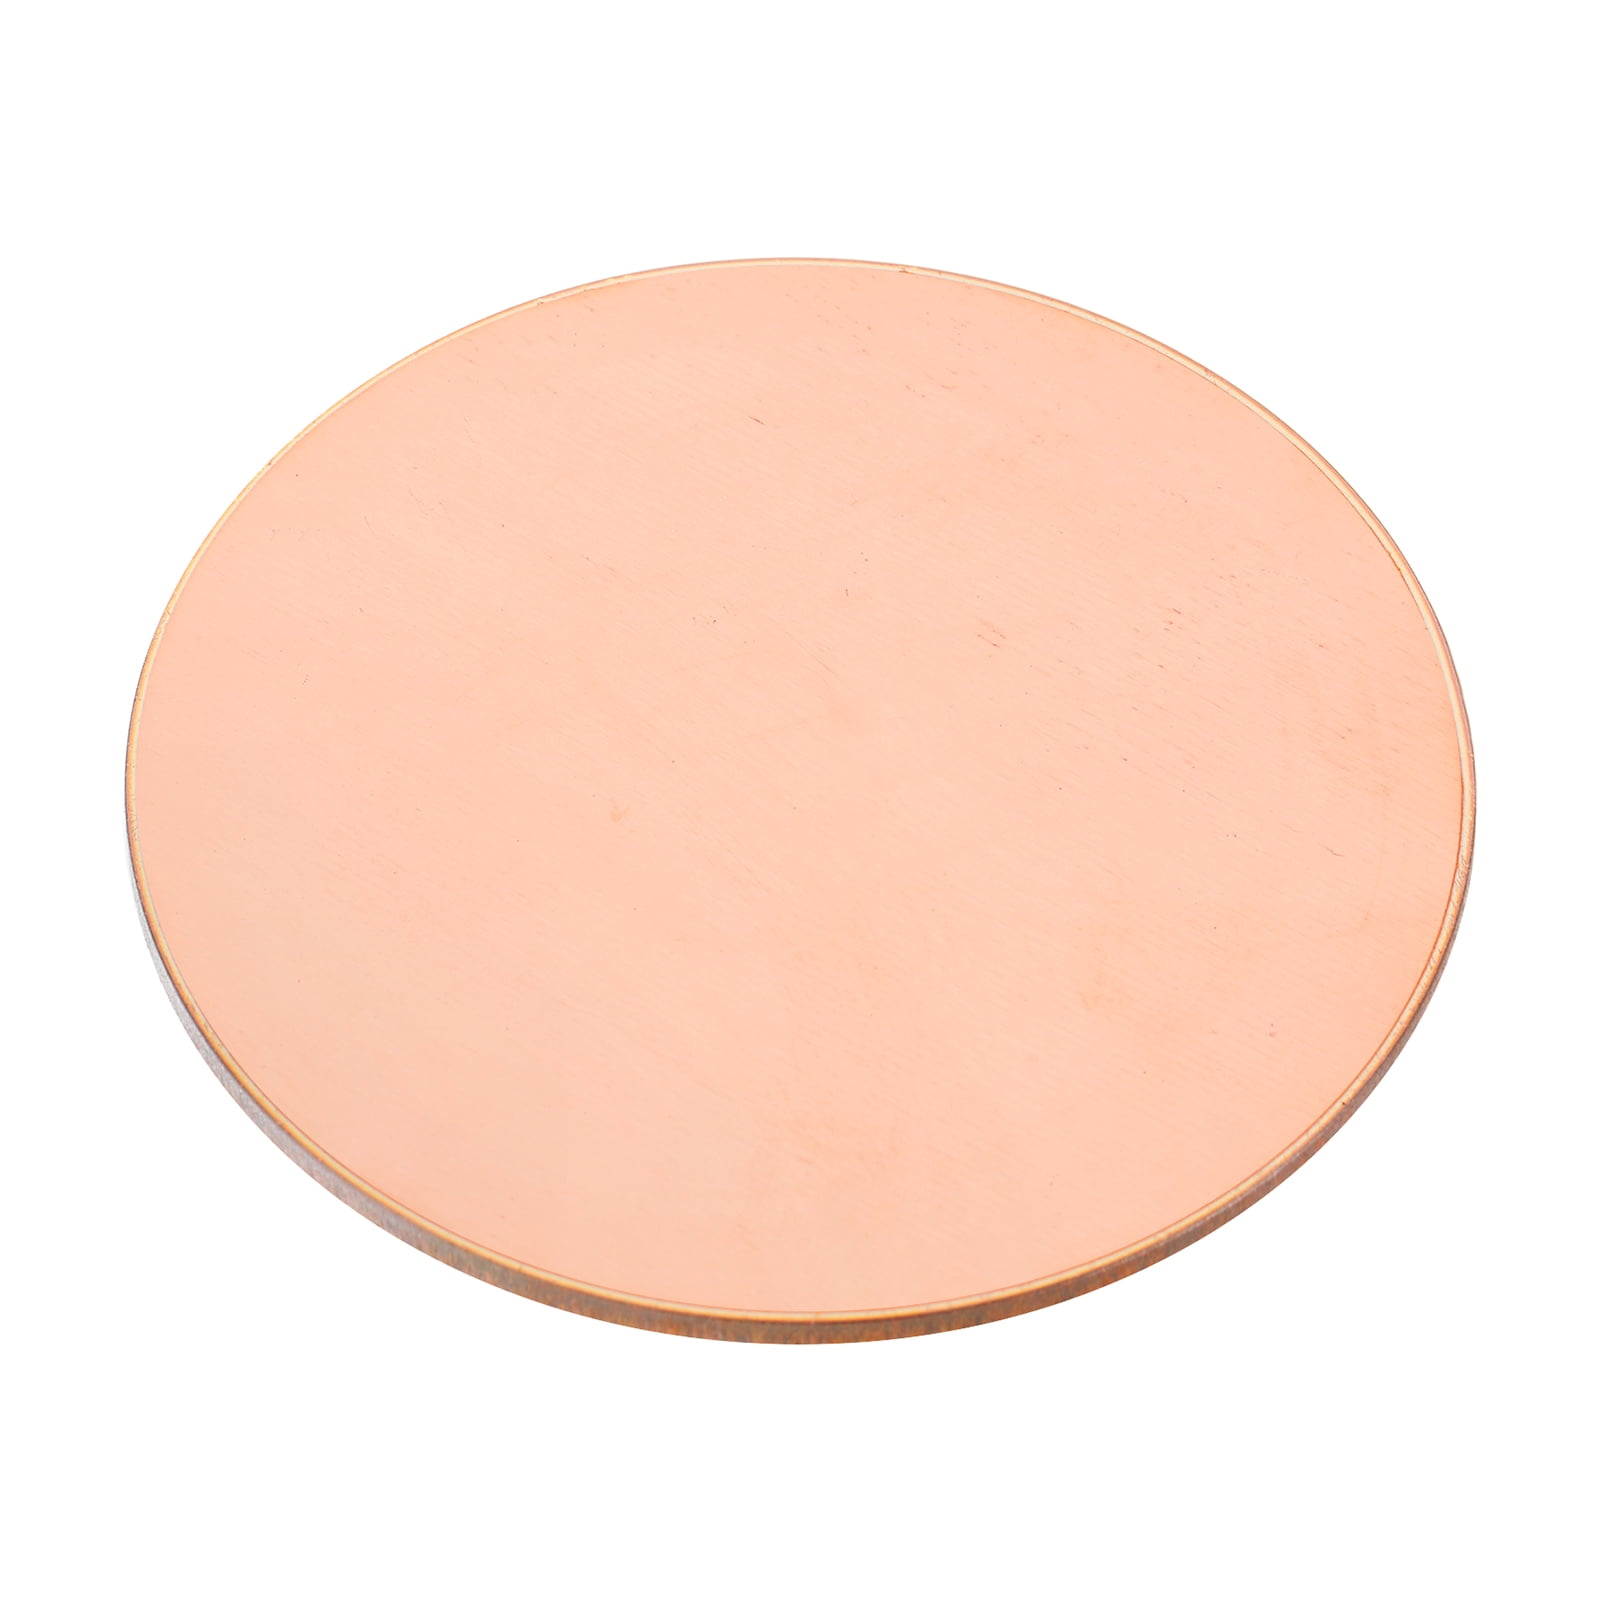 Uxcell Pure Copper Sheet, 1 3/16 inch x 0.12 inch 9 Gauge T2 Copper Metal Round Plate for Crafts, Electrical Repairs, 2 Pack, Size: 1 3/16 x 0.12, Bronze